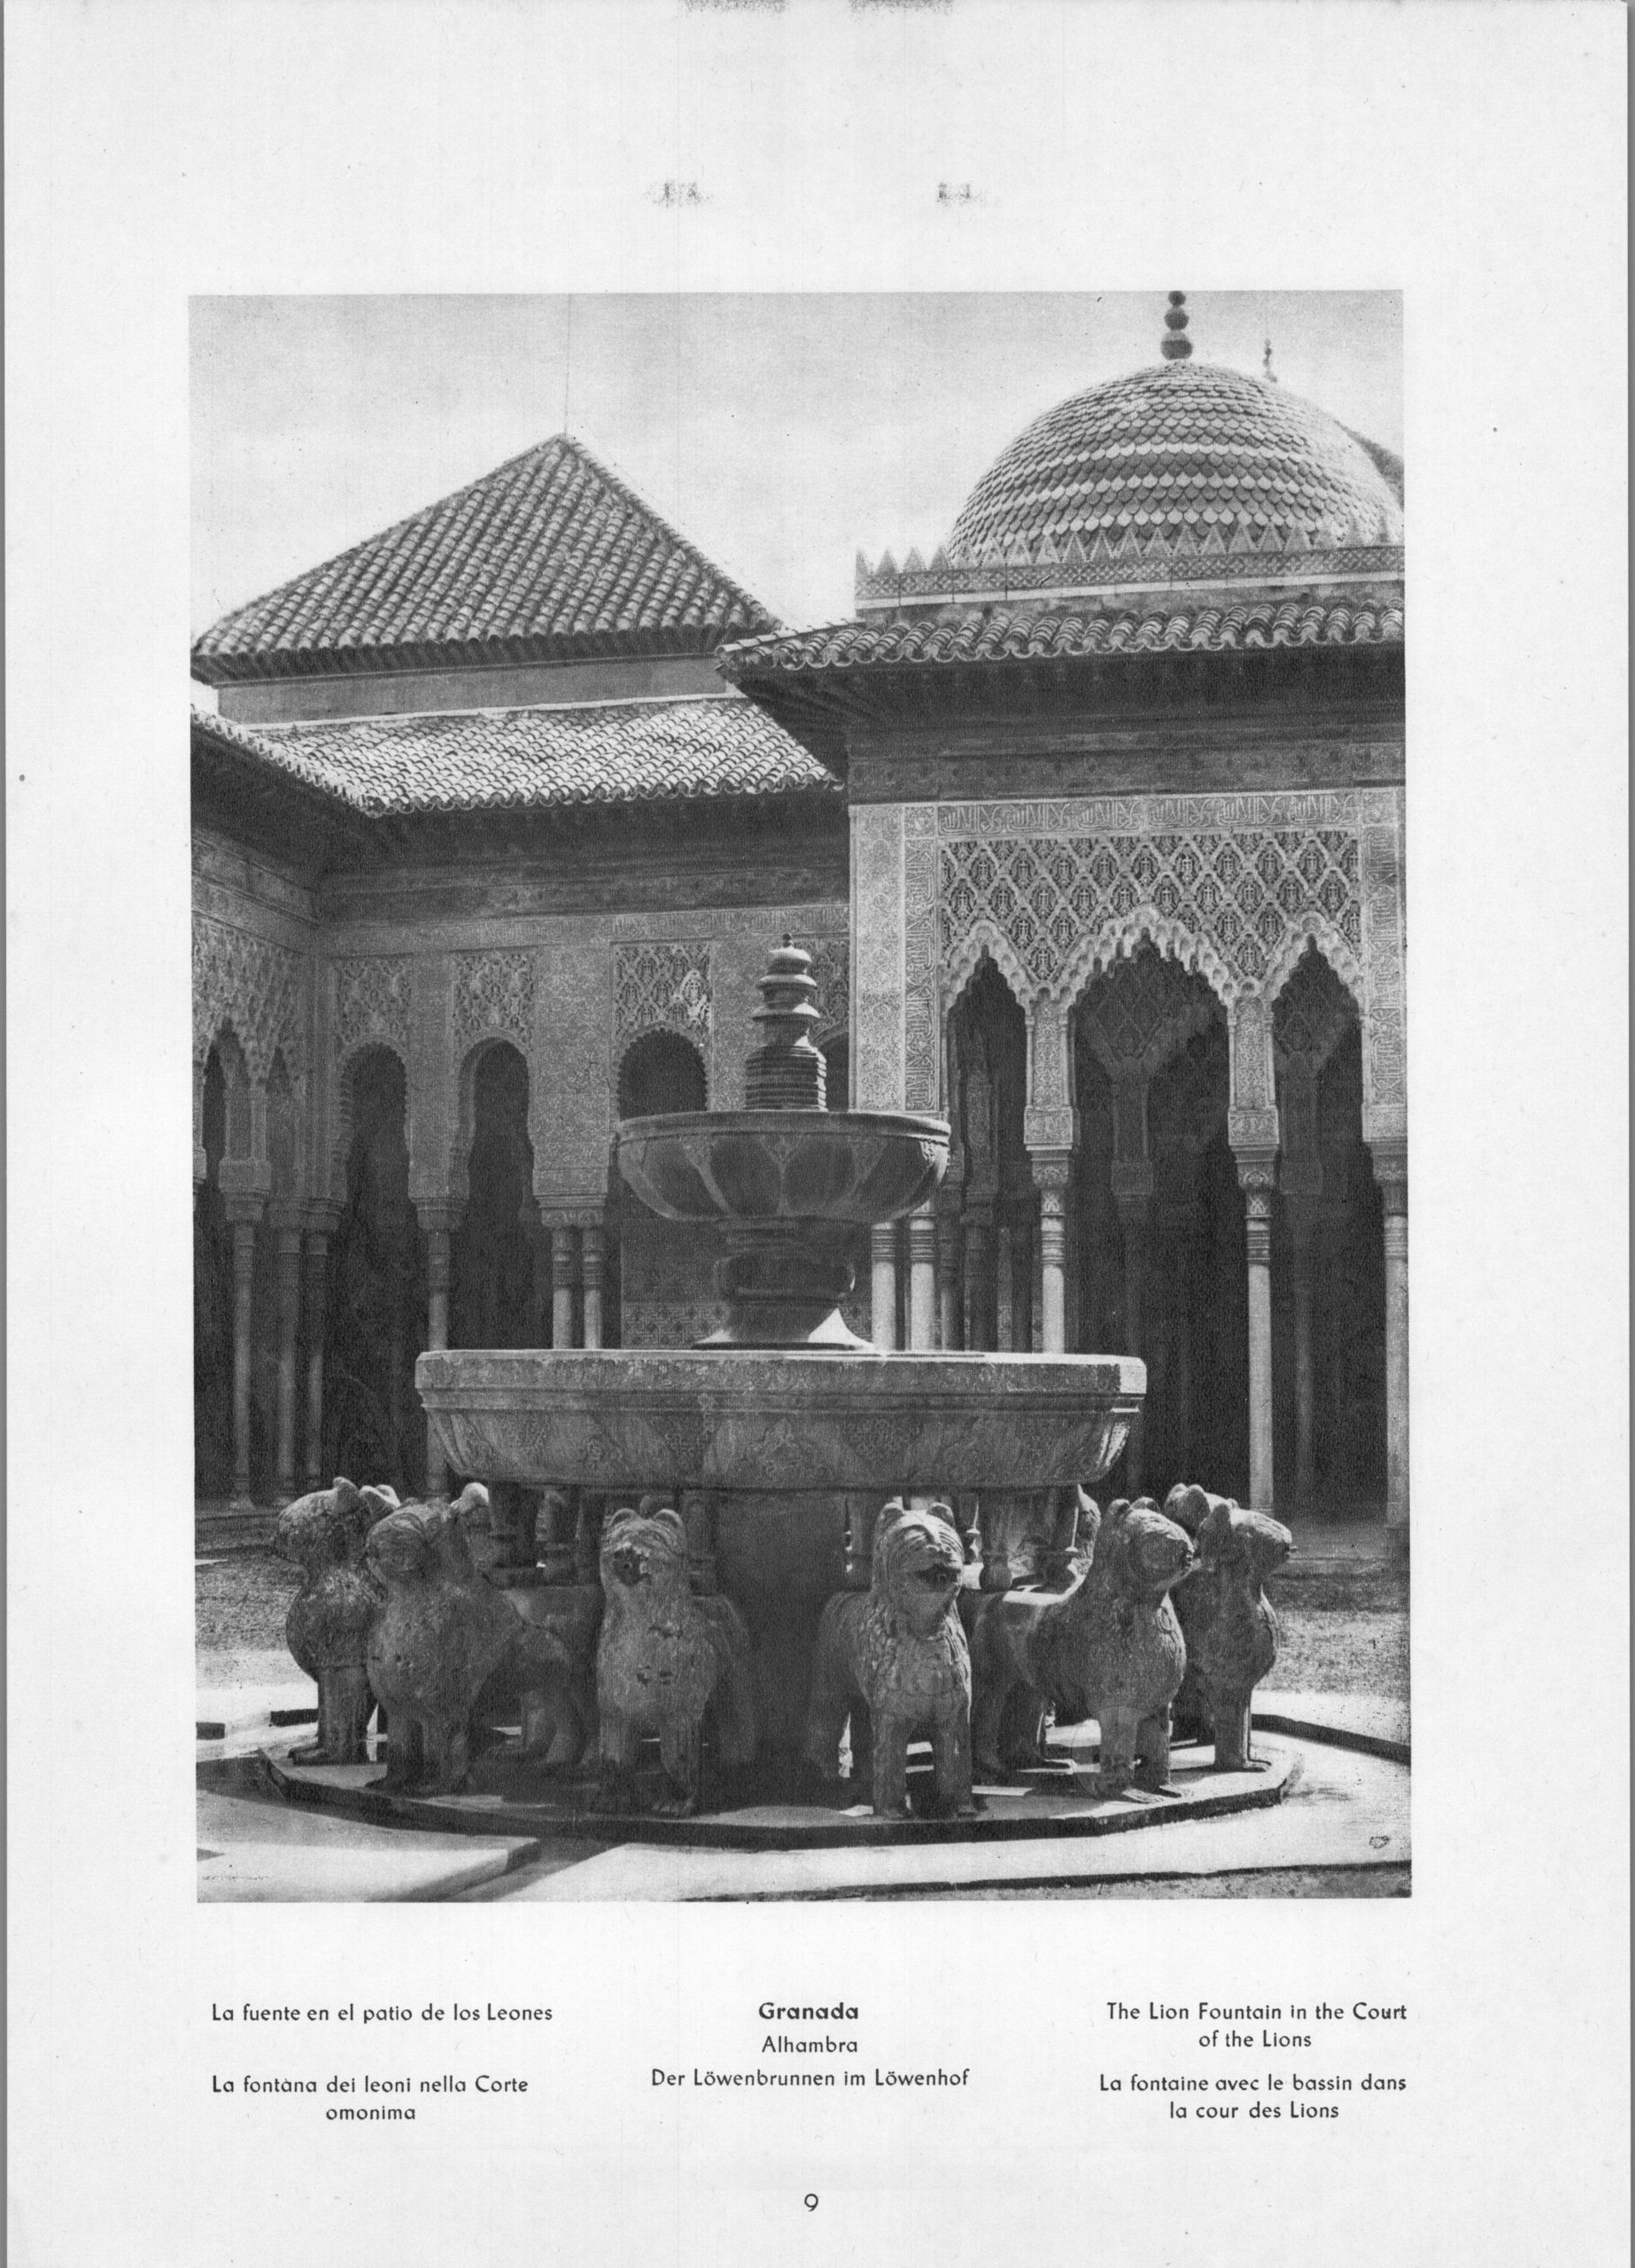 Granada Alhambra - The Lion Fountain in the Court of the Lions